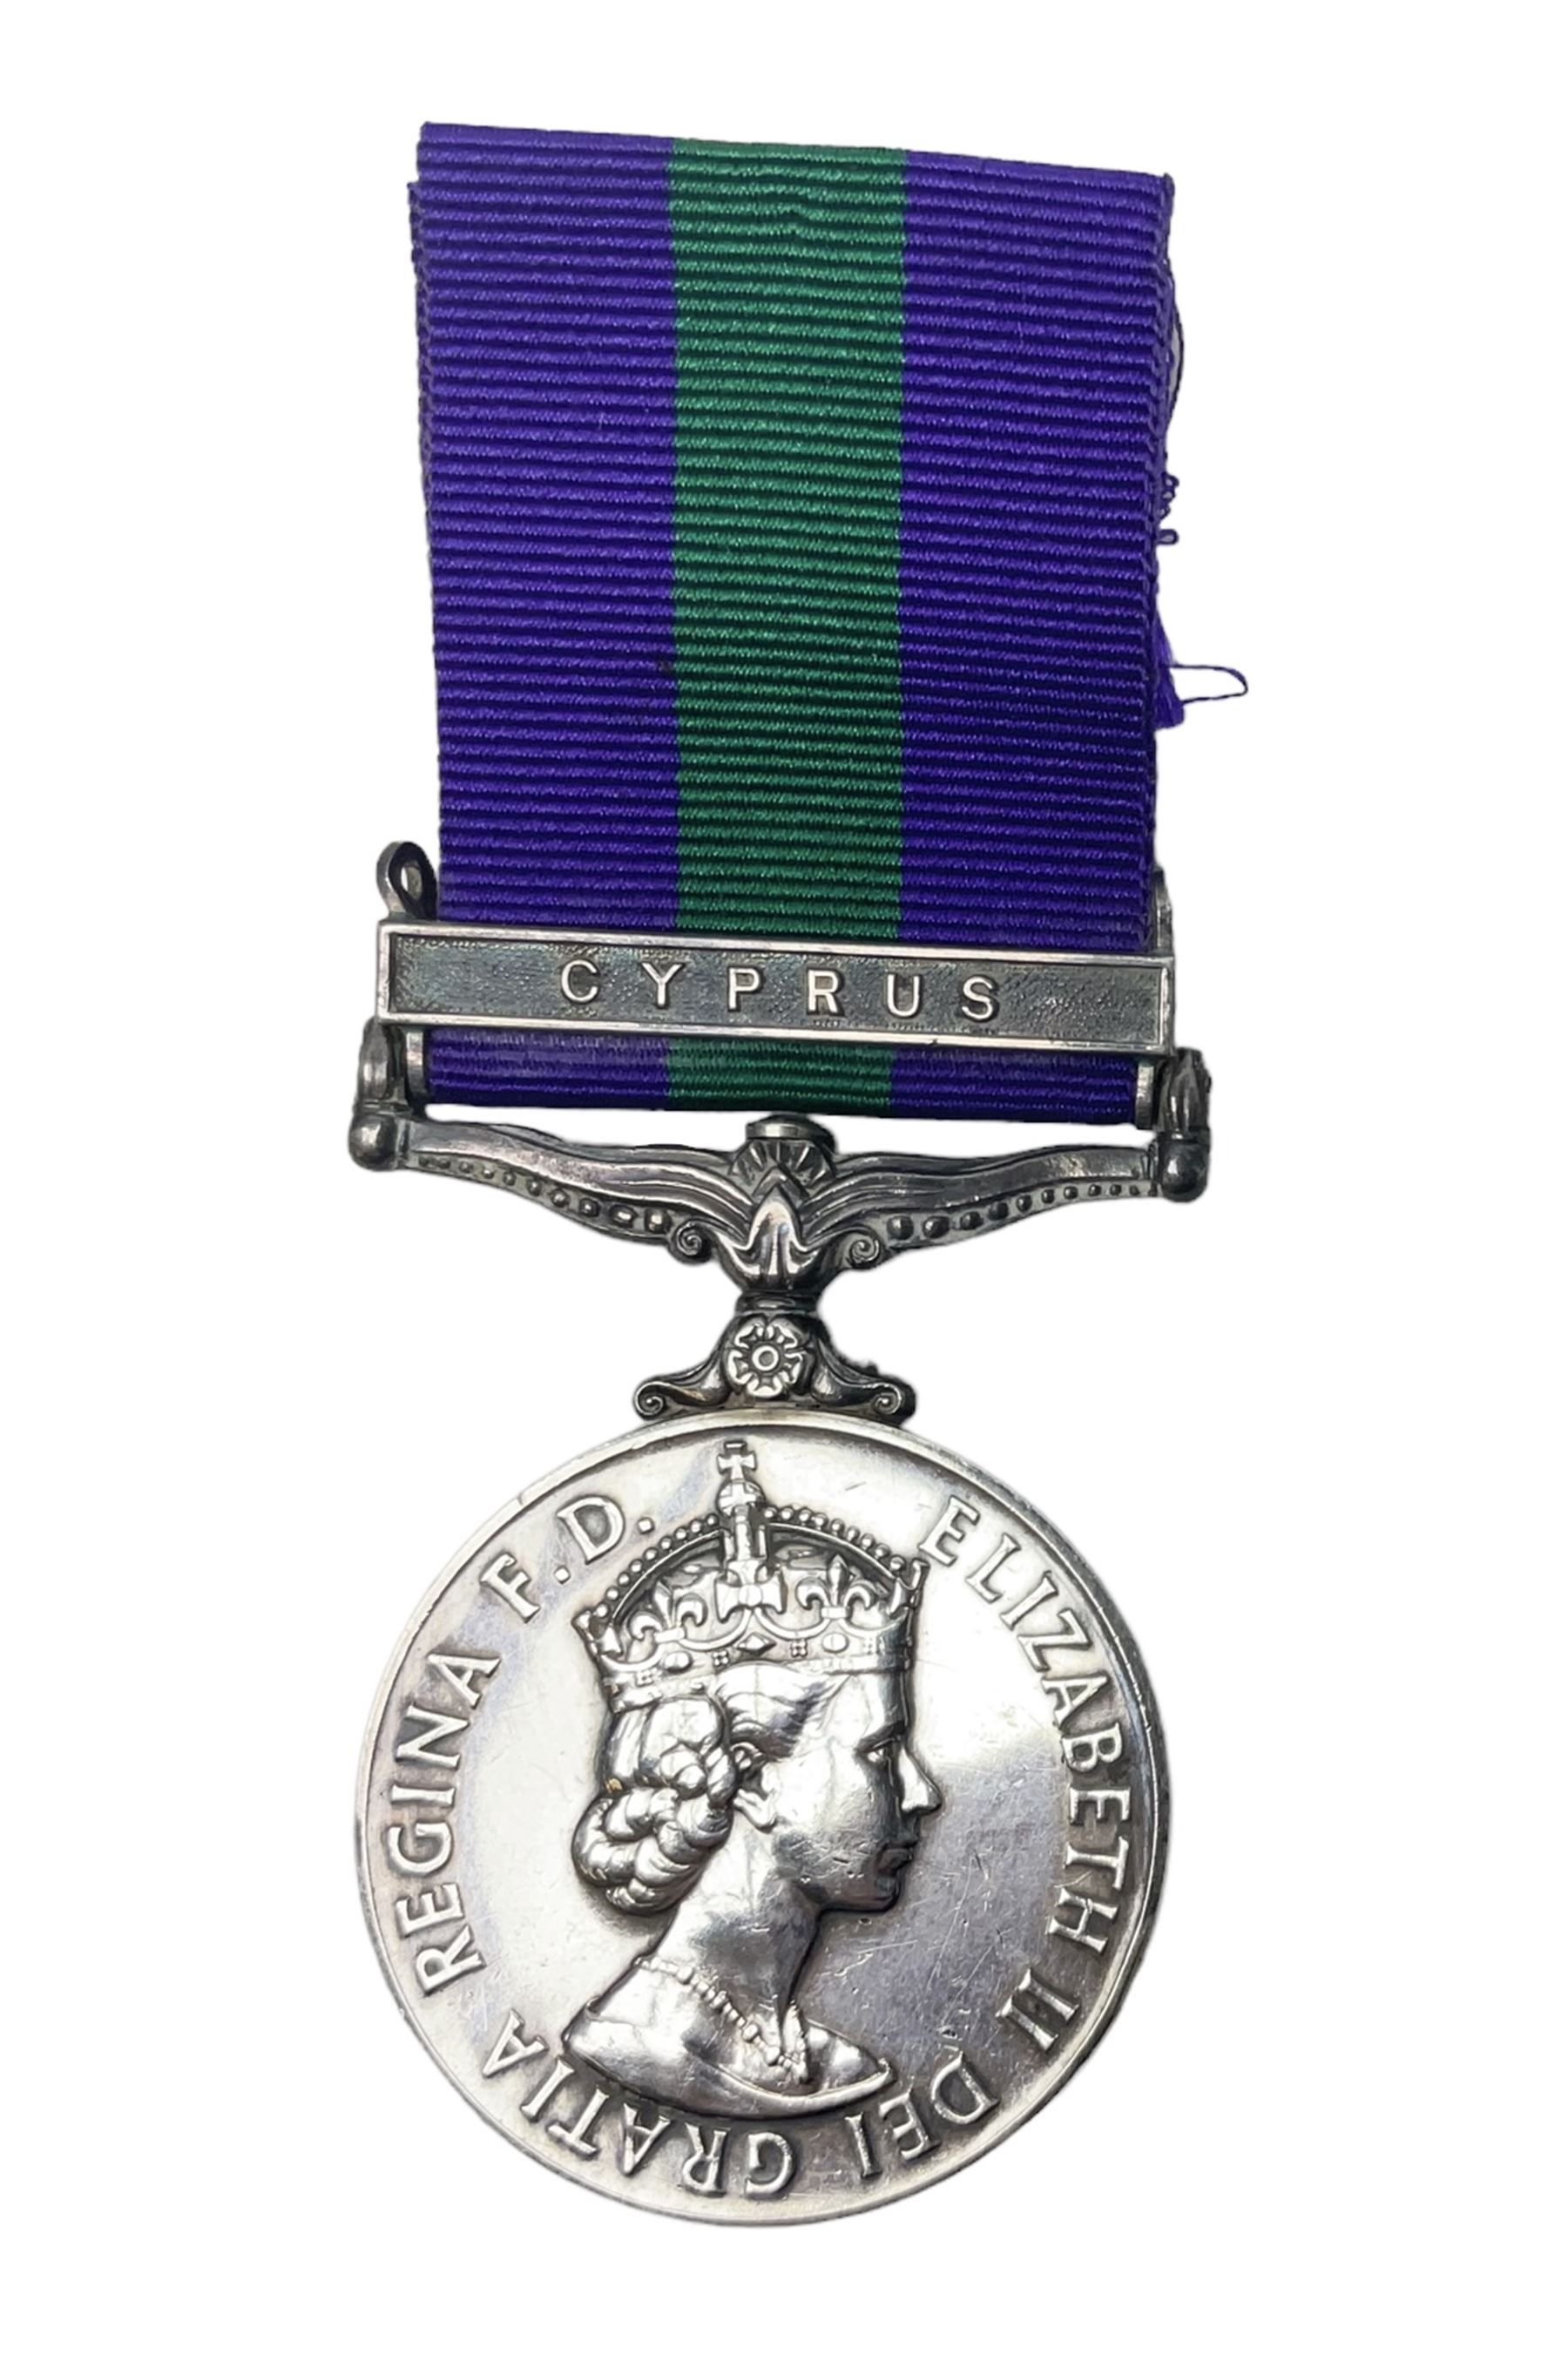 Elizabeth II General Service Medal with Cyprus clasp awarded to T/23506119 Dvr. H. King R.A.S.C.; wi